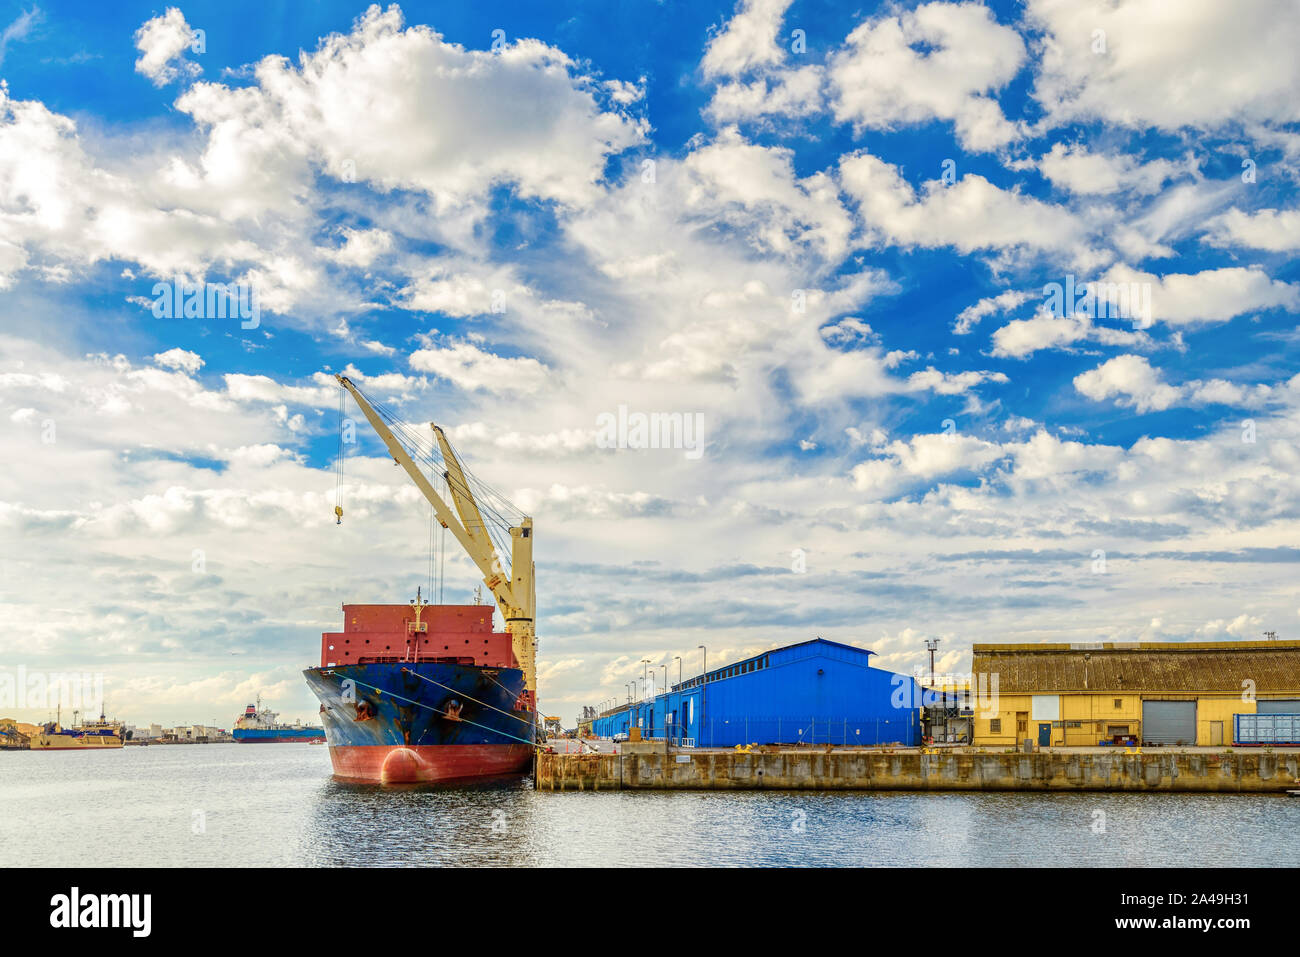 Cargo ship with cranes docked in industrial port Stock Photo